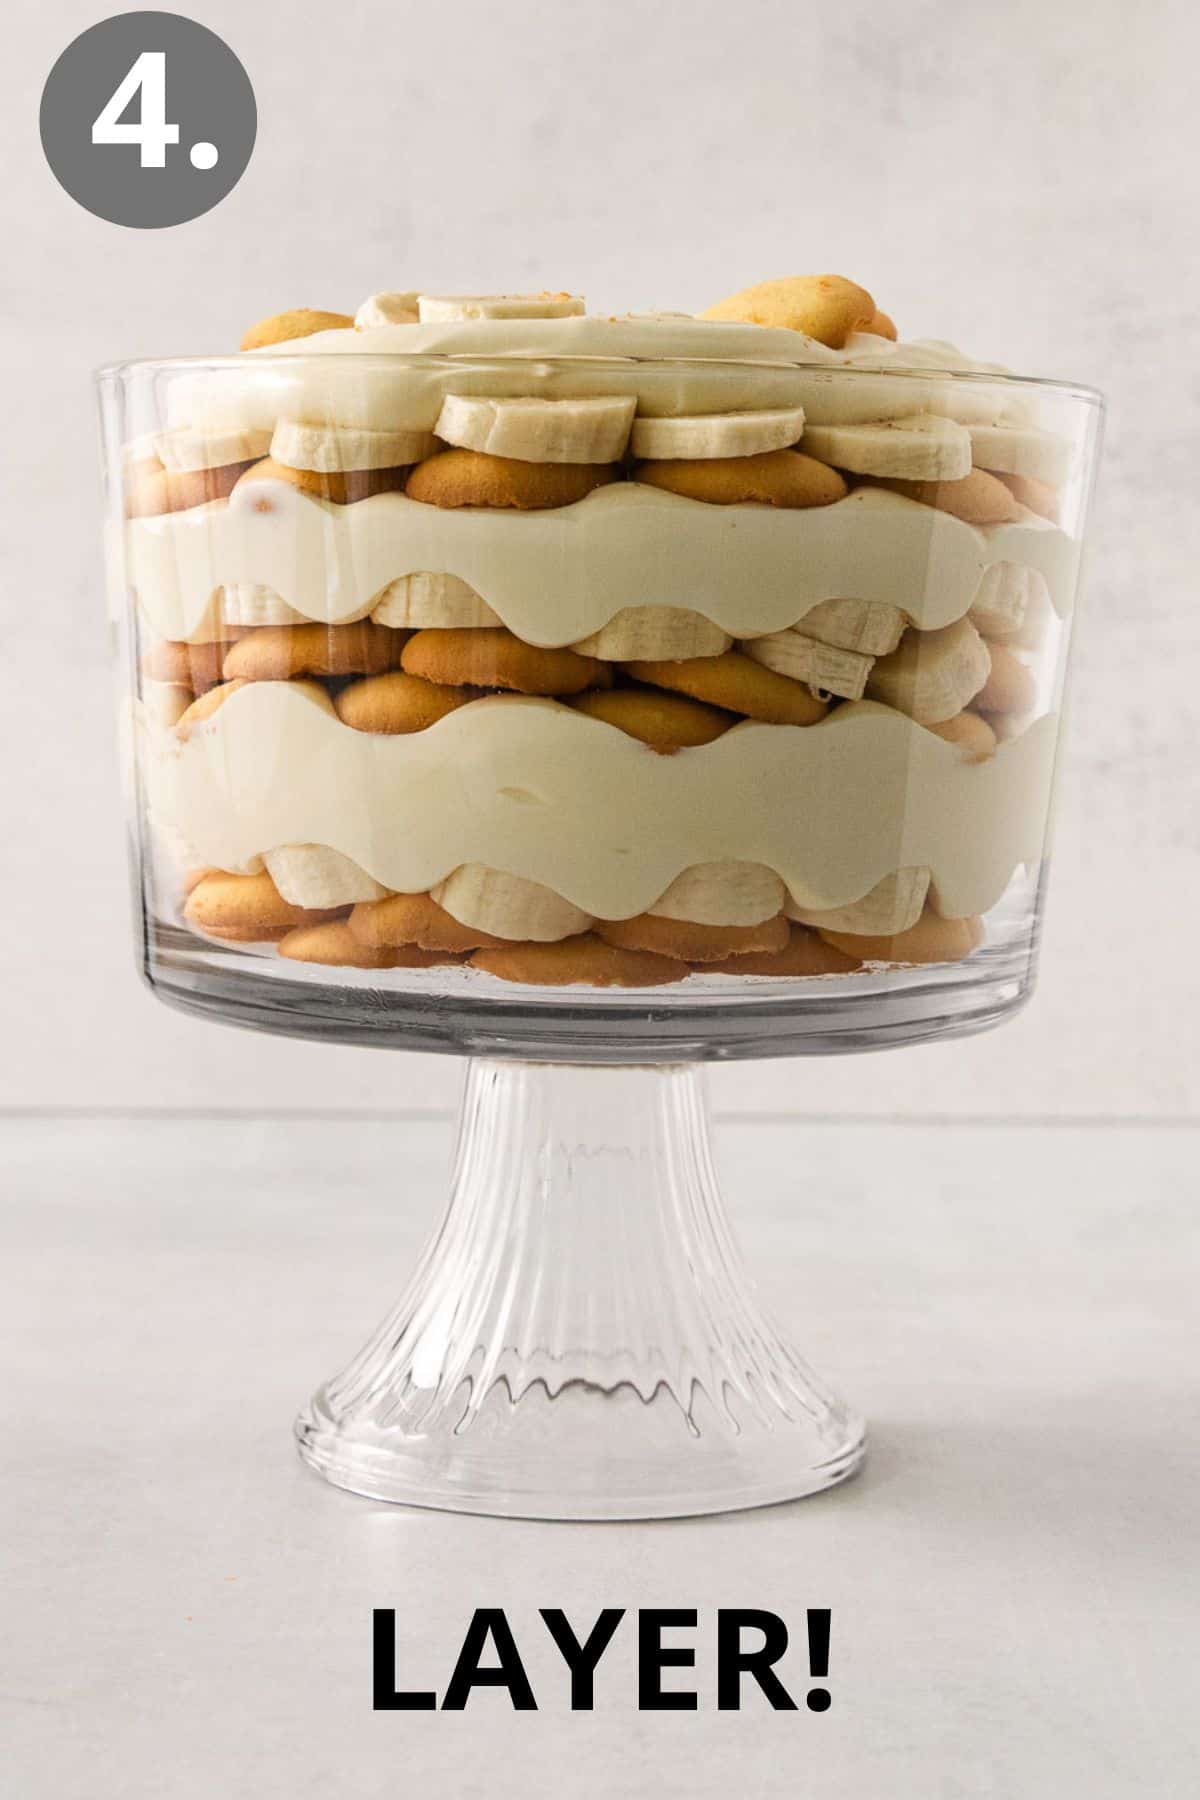 A side view of gluten-free banana pudding in a trifle dish